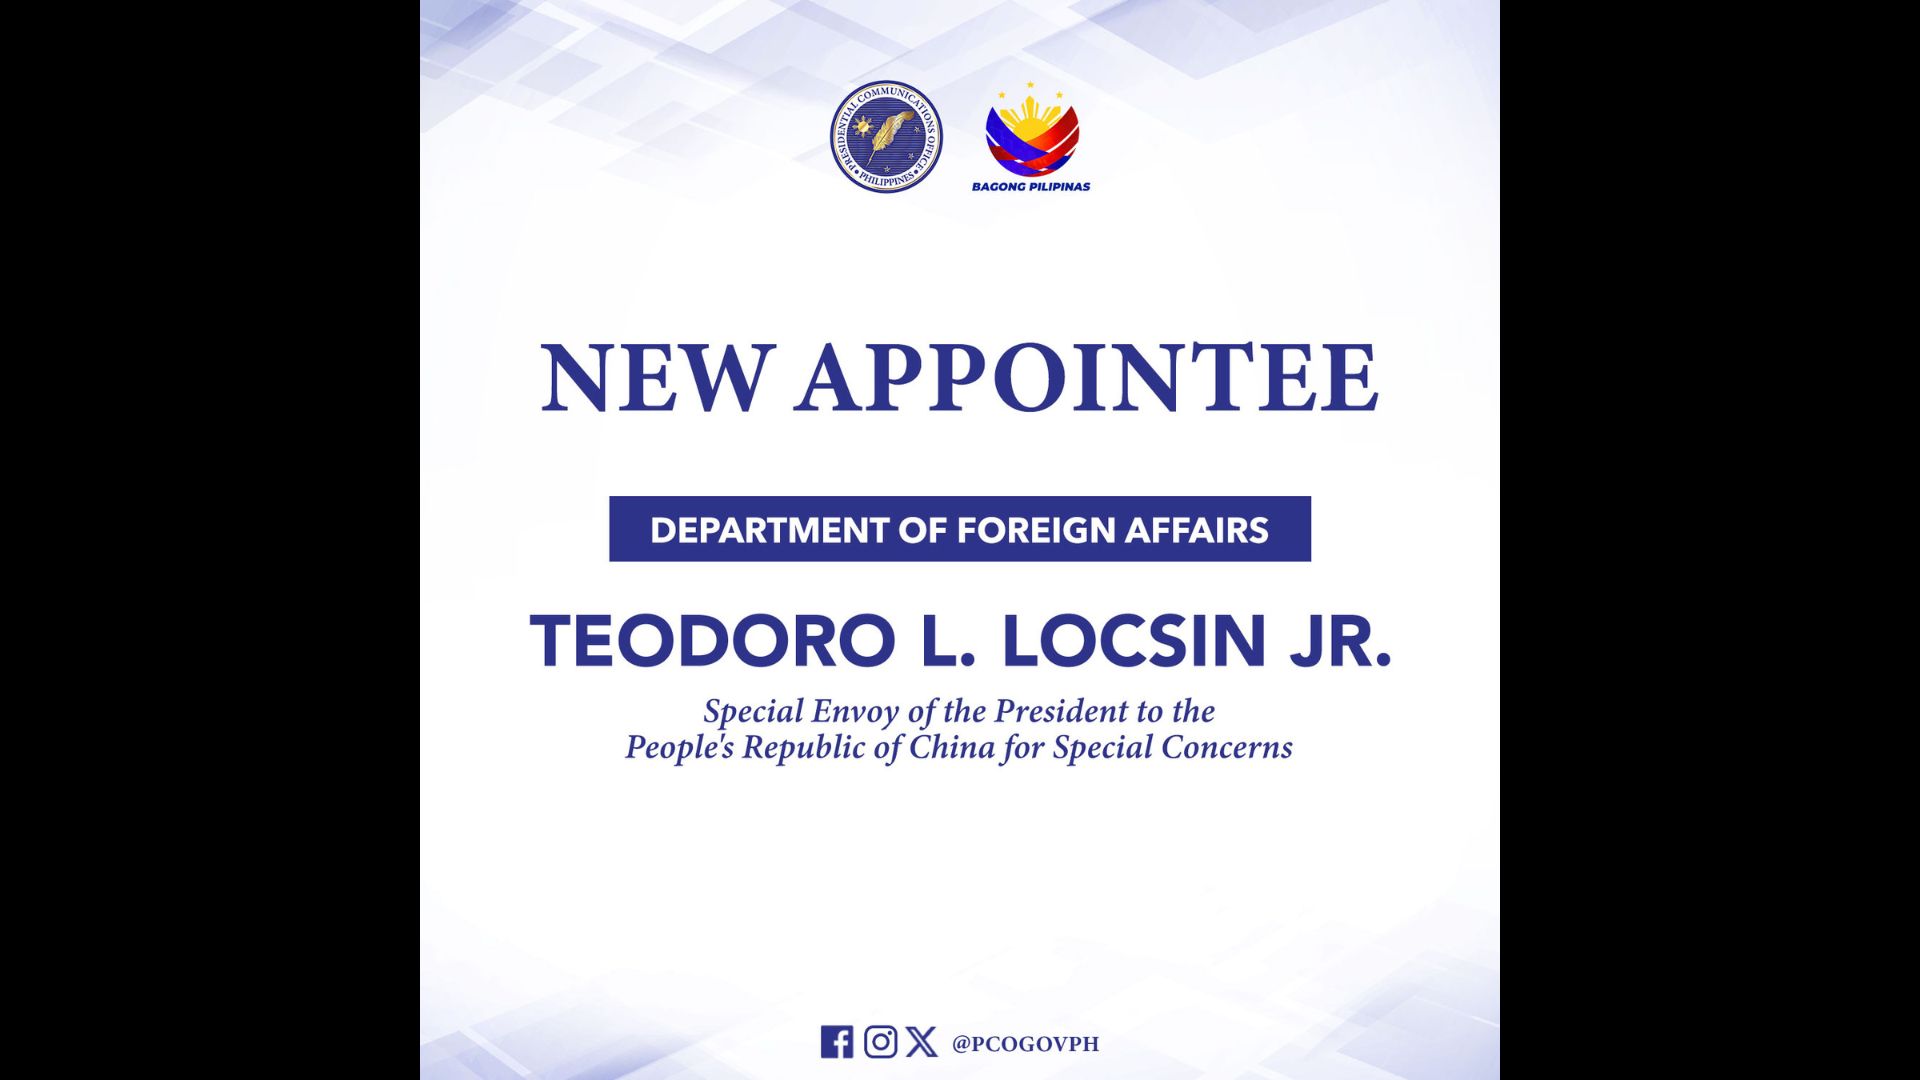 Teodoro Locsin Jr. hinirang bilang Special Envoy of the President to the People’s Republic of China for Special Concerns